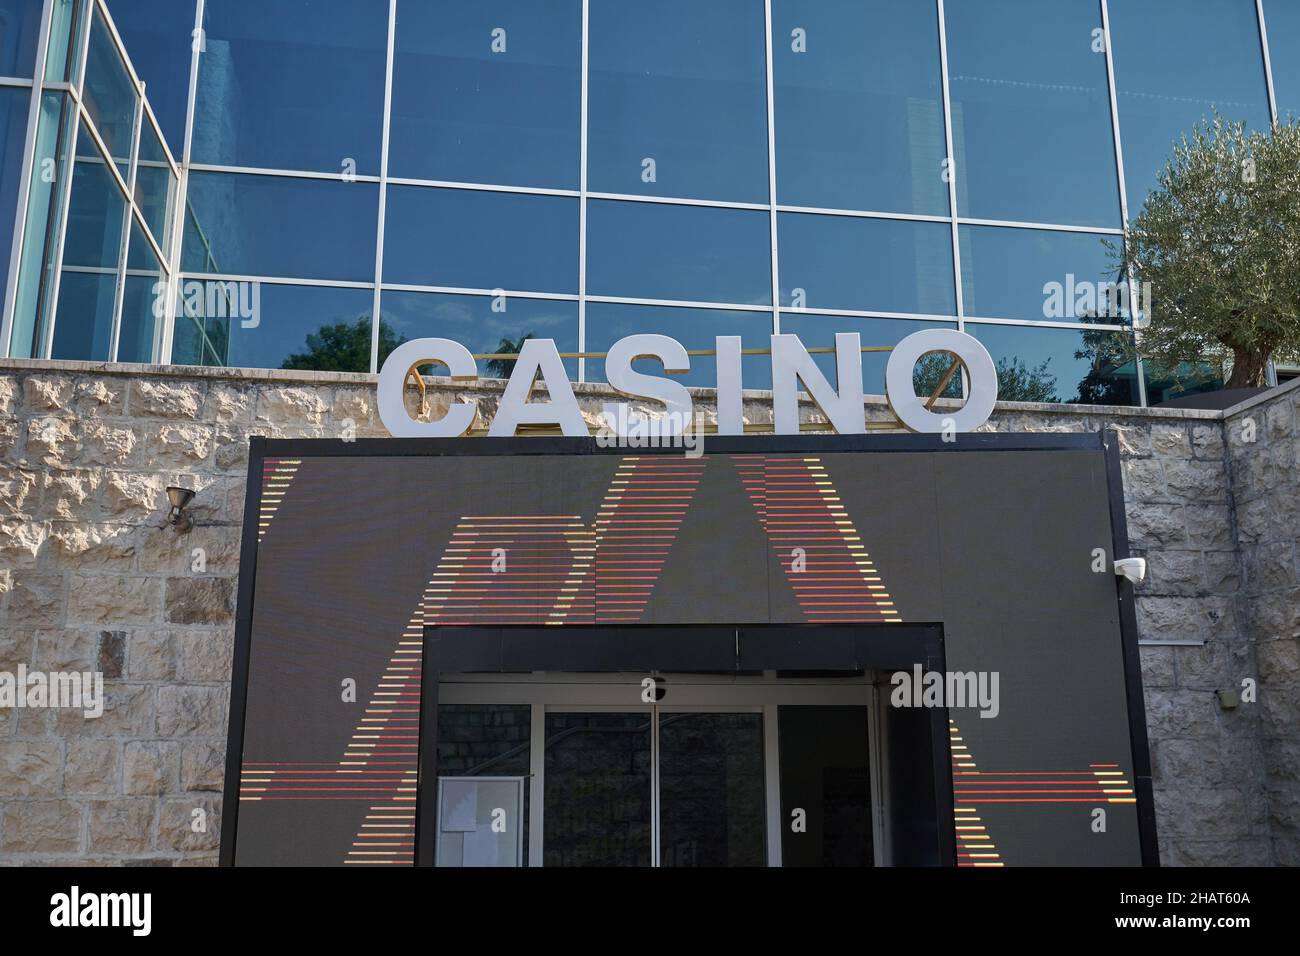 Advertising sign of the casino on the facade of the building. Stock Photo